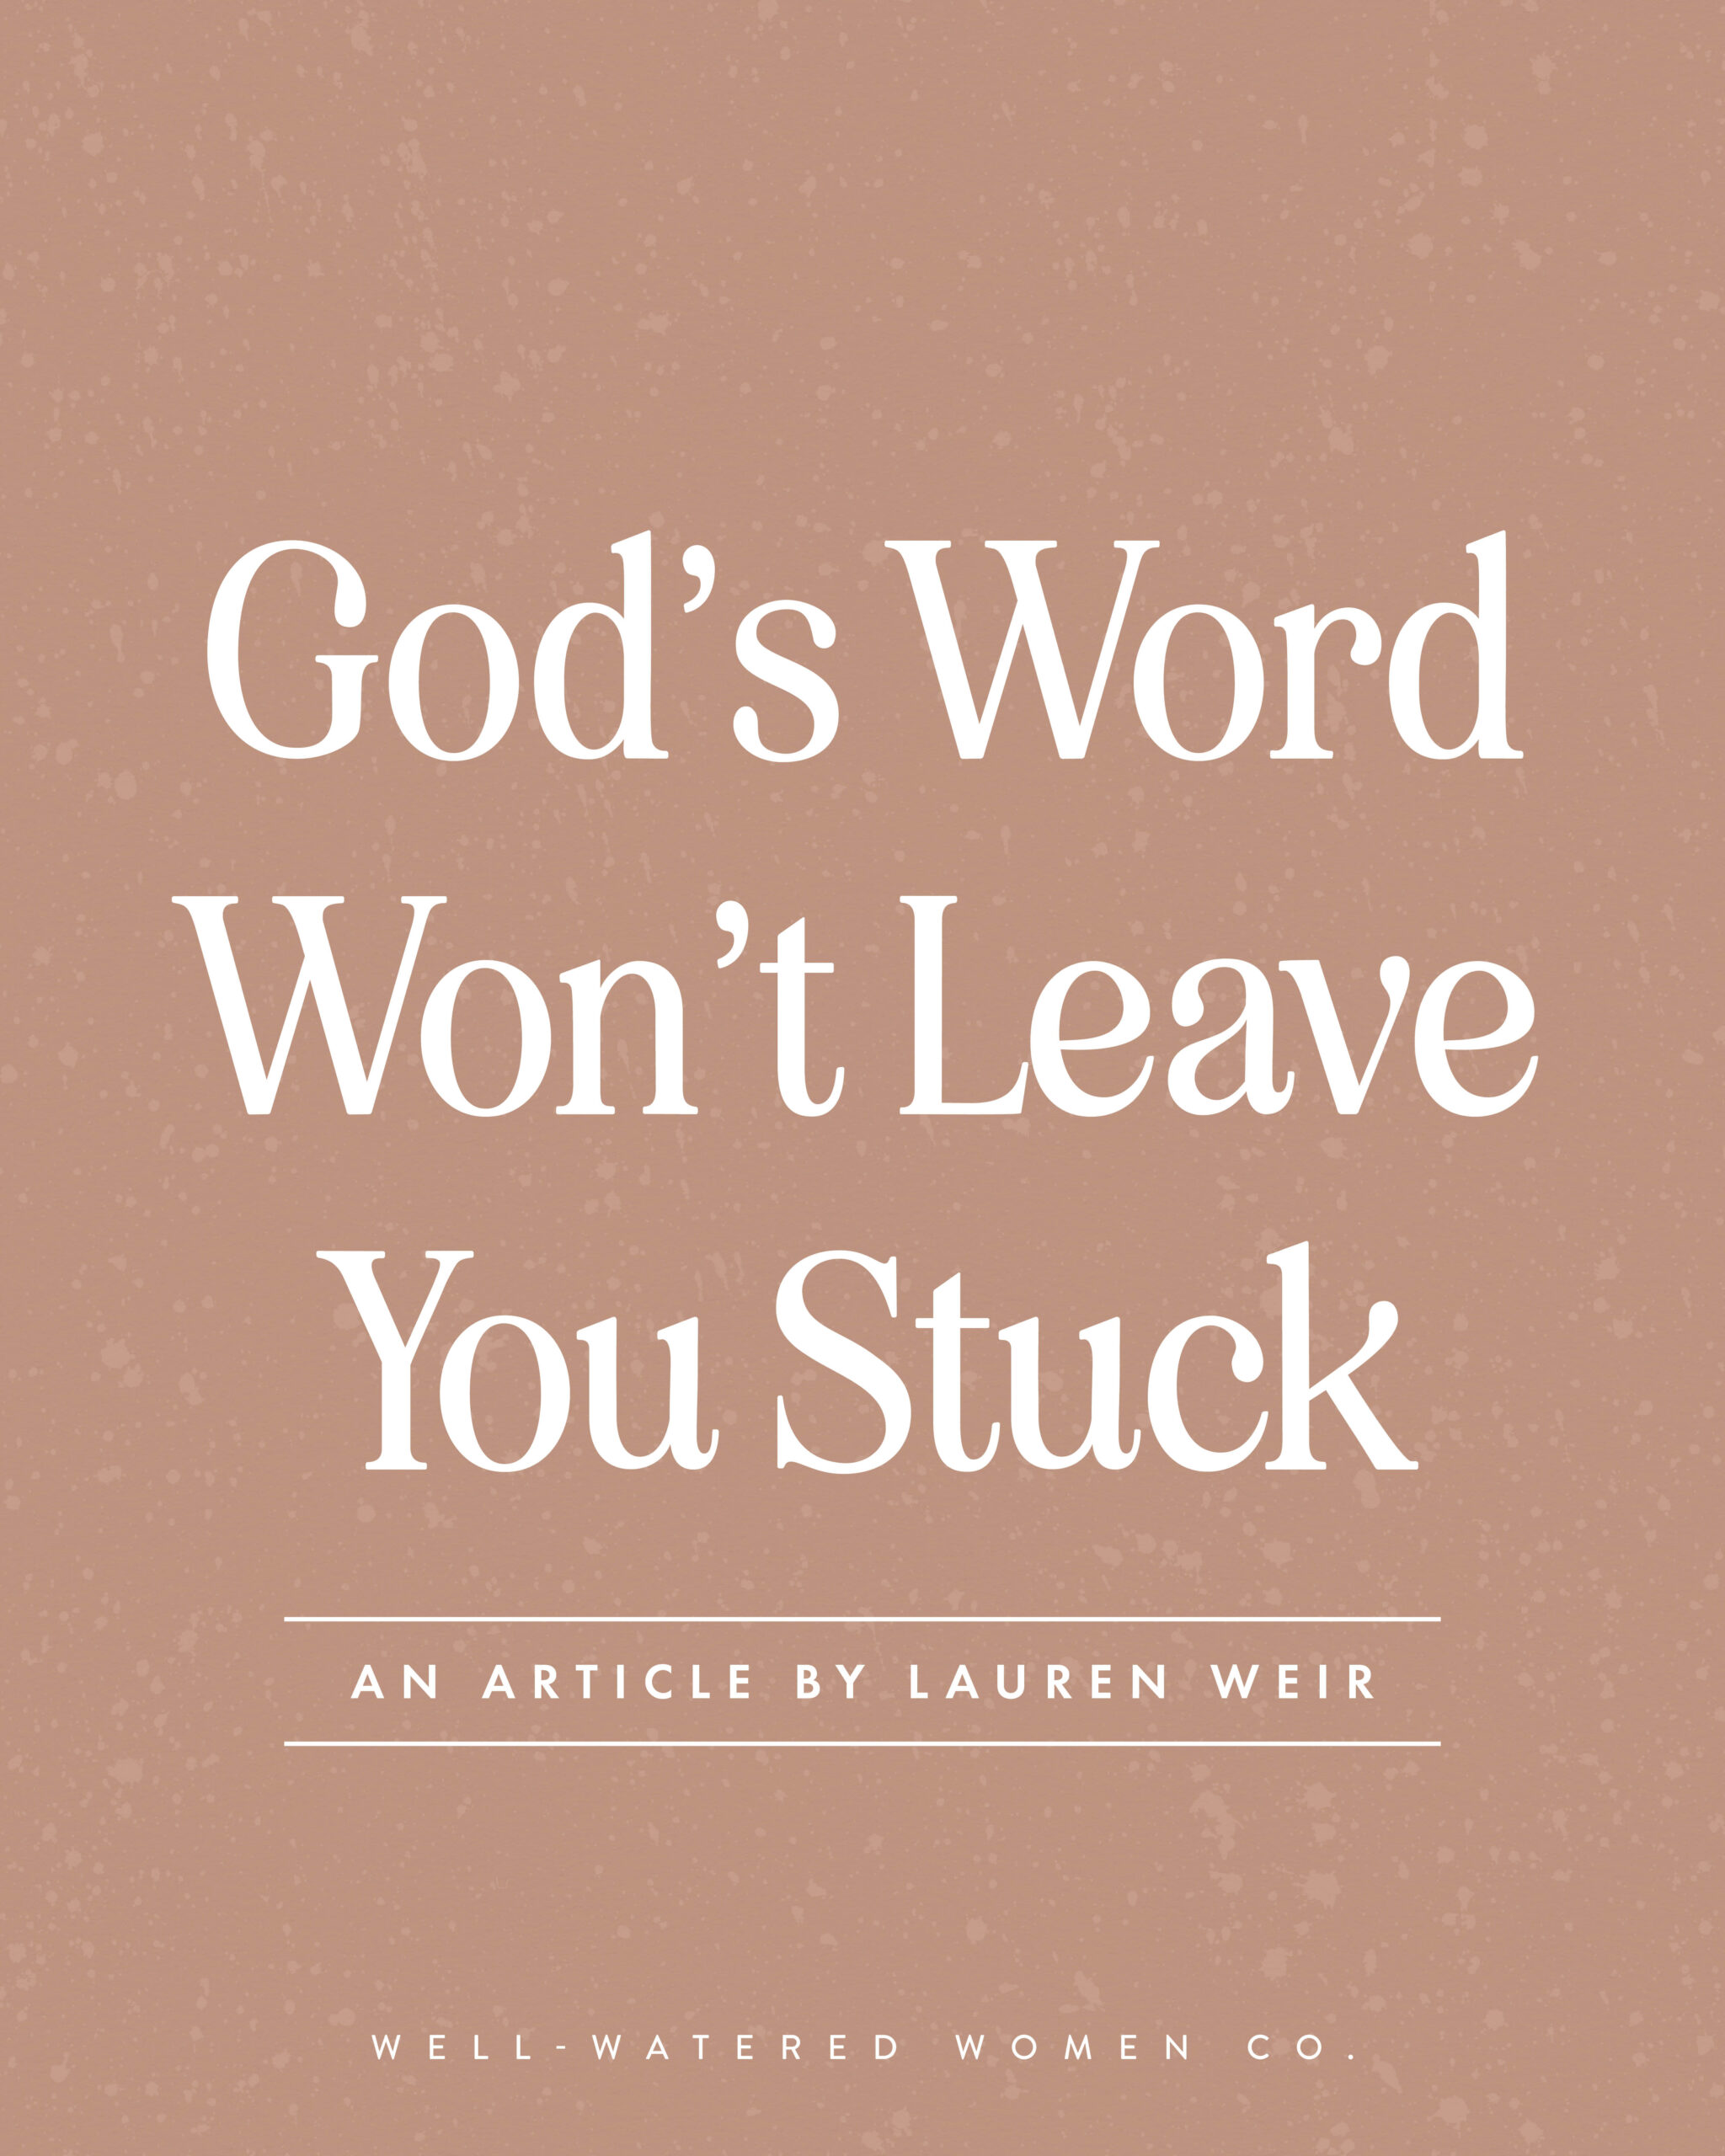 God's Word Won't Leave You Stuck - an article from Well-Watered Women